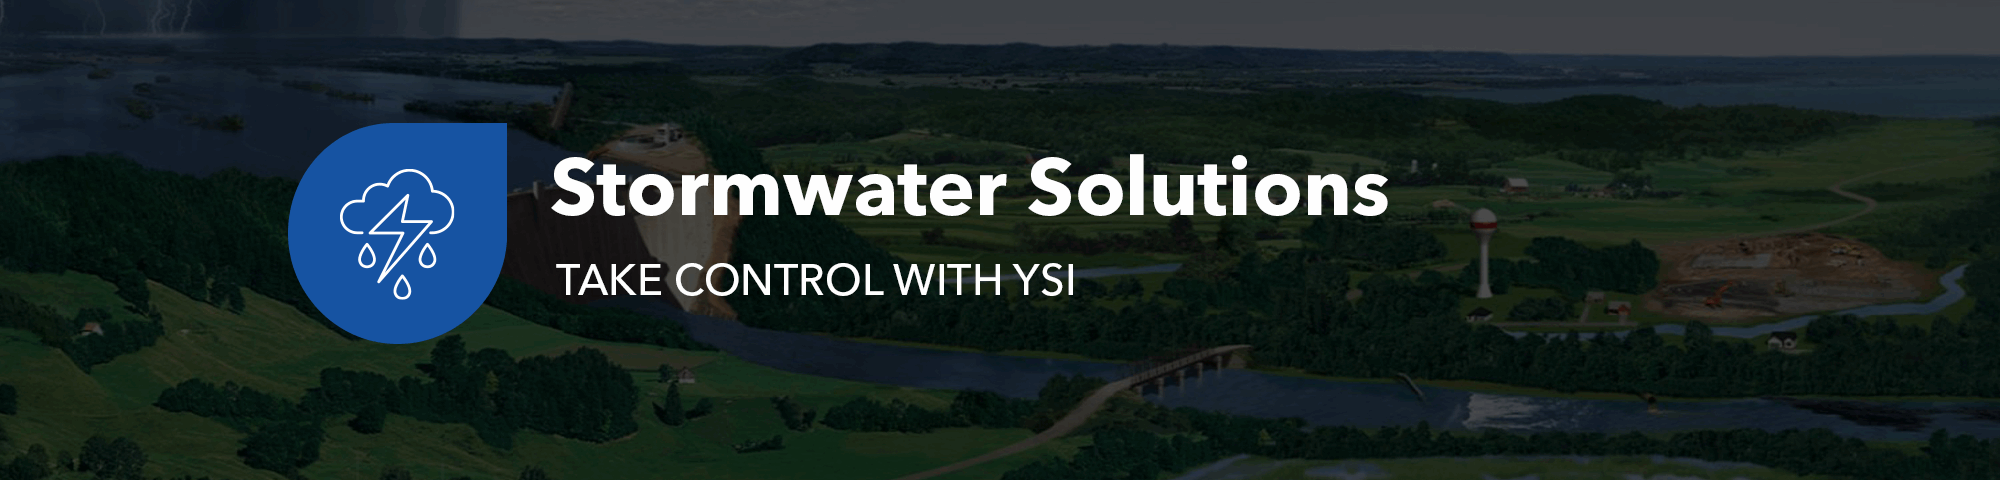 Stormwater Monitoring Equipment for Water Quality, Flow, and Level